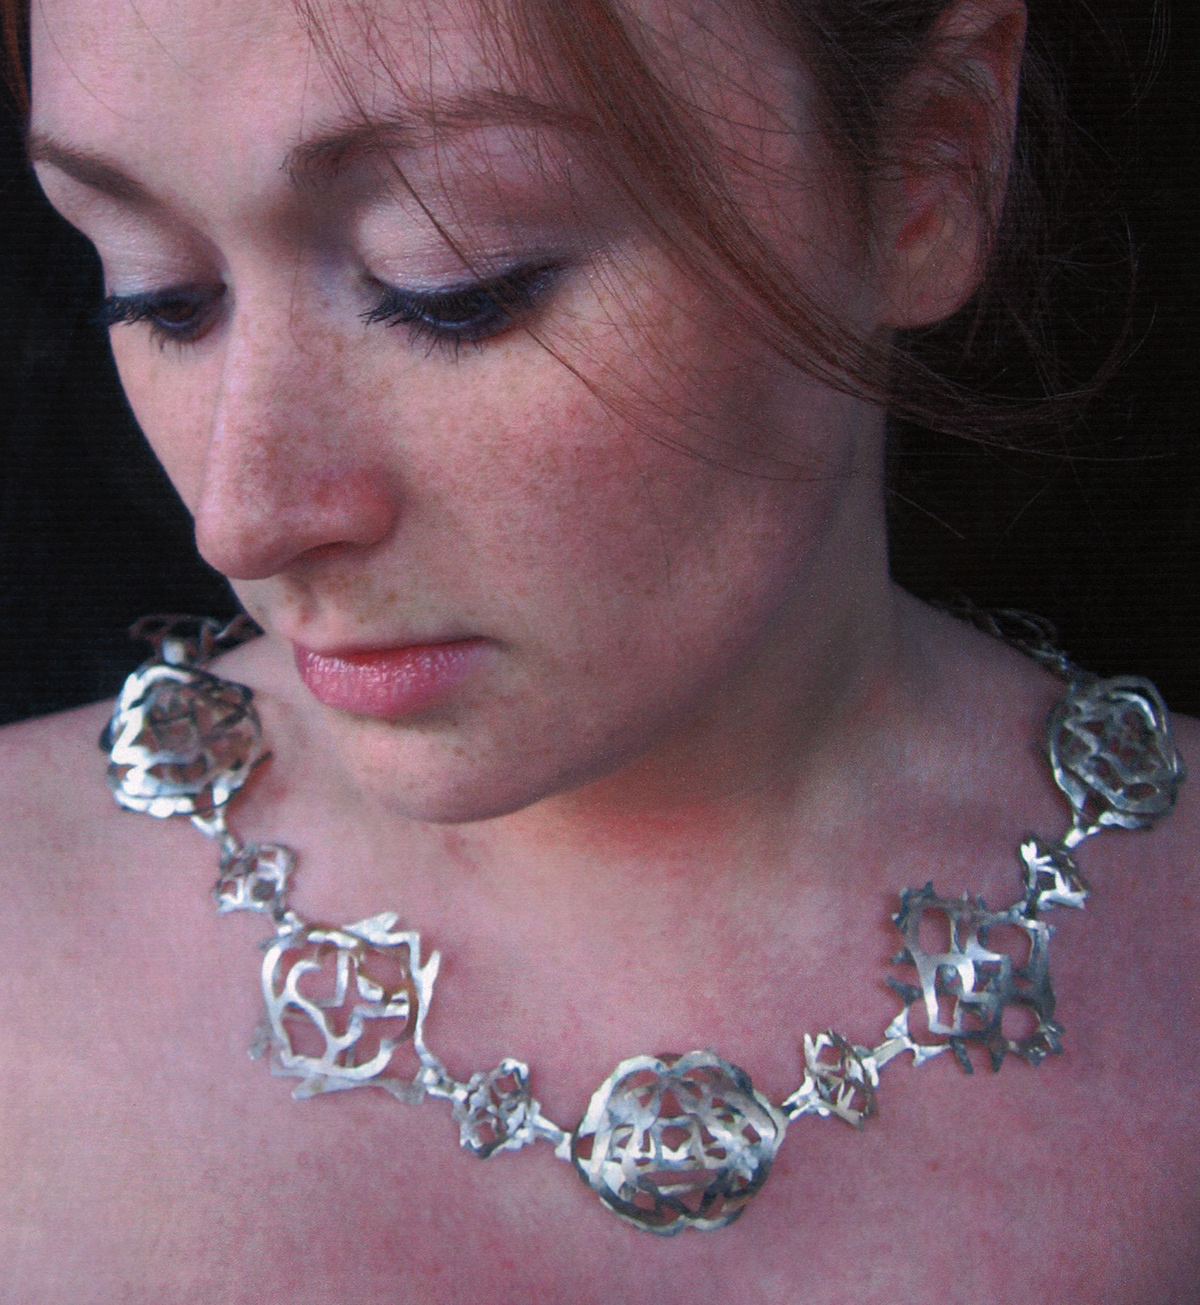 Wearble Art Large ScaleJewelry Body Adornments non-traditional materials recycled materials natural objects